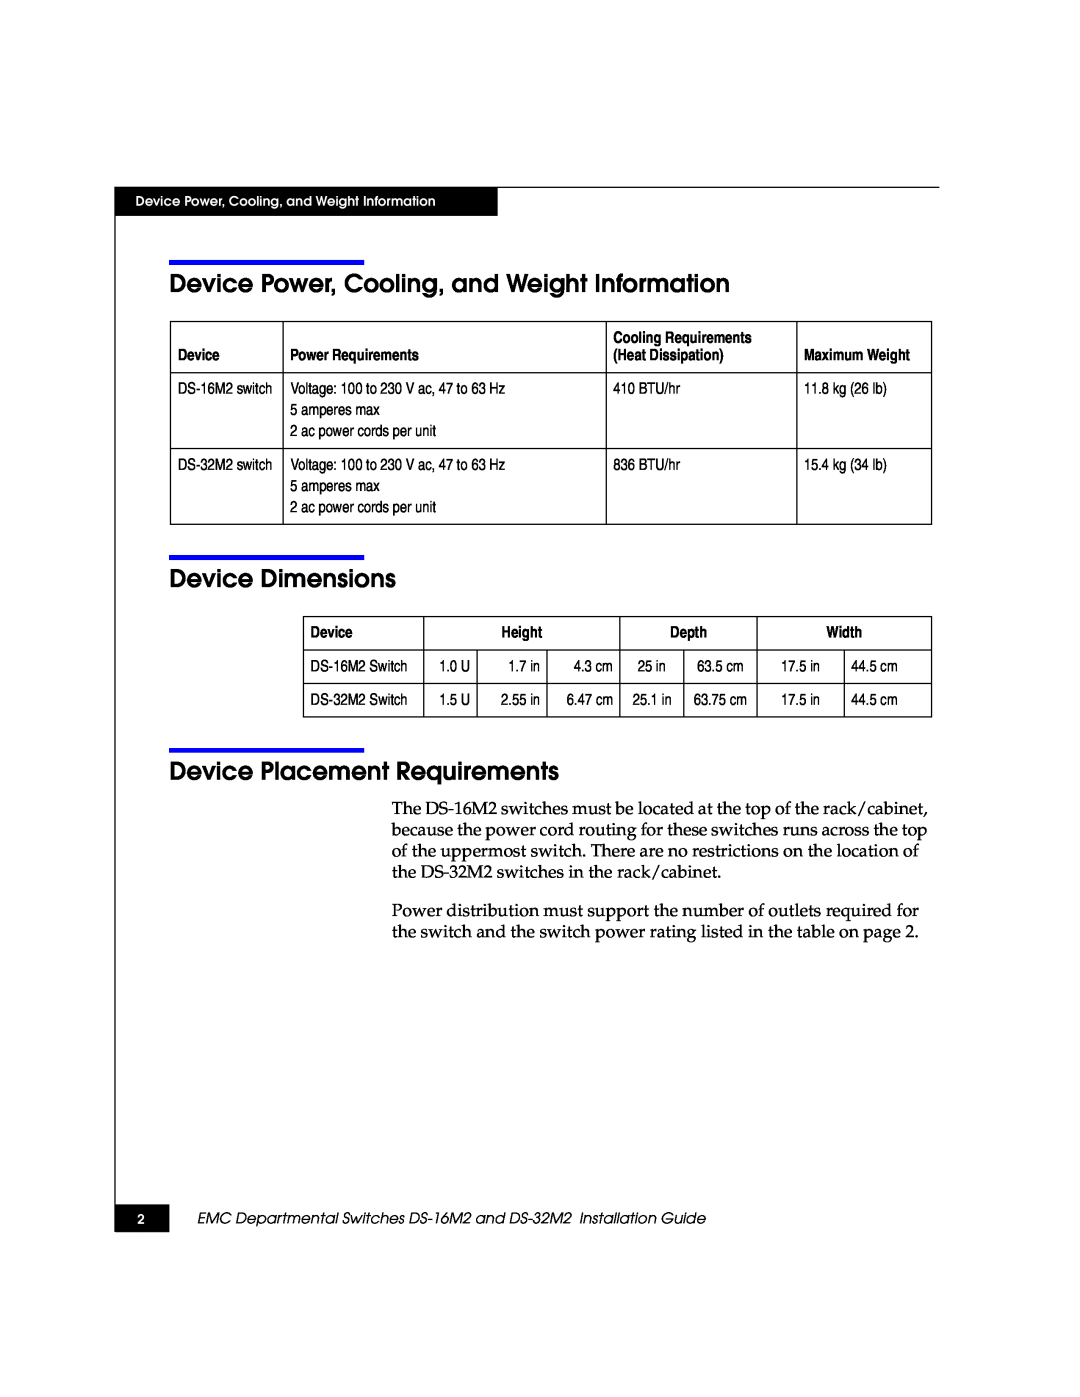 Kraftware Corporation DS-16M2 Device Power, Cooling, and Weight Information, Device Dimensions, Cooling Requirements 